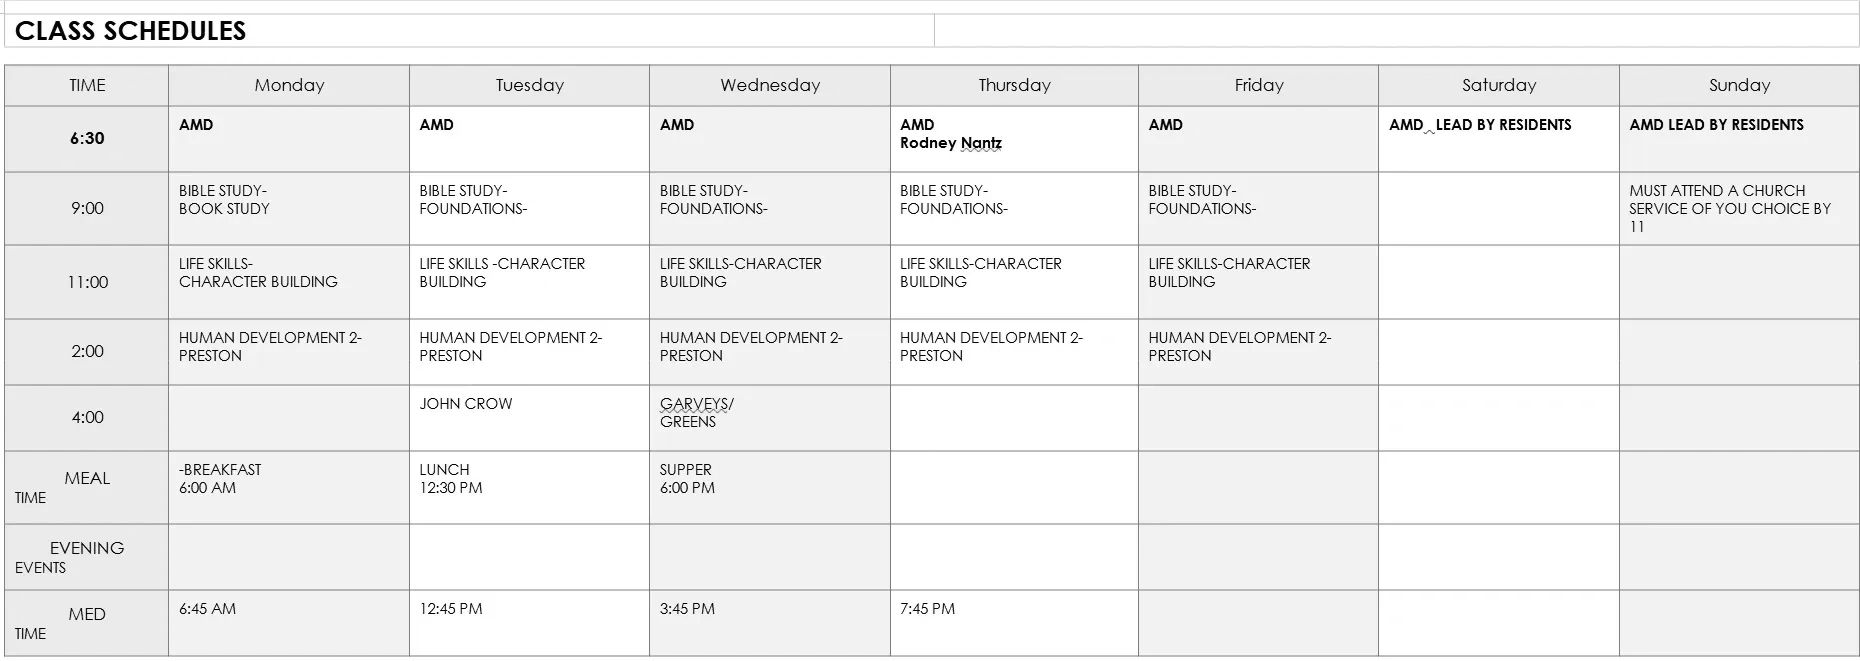 House of Mercy Class Schedule